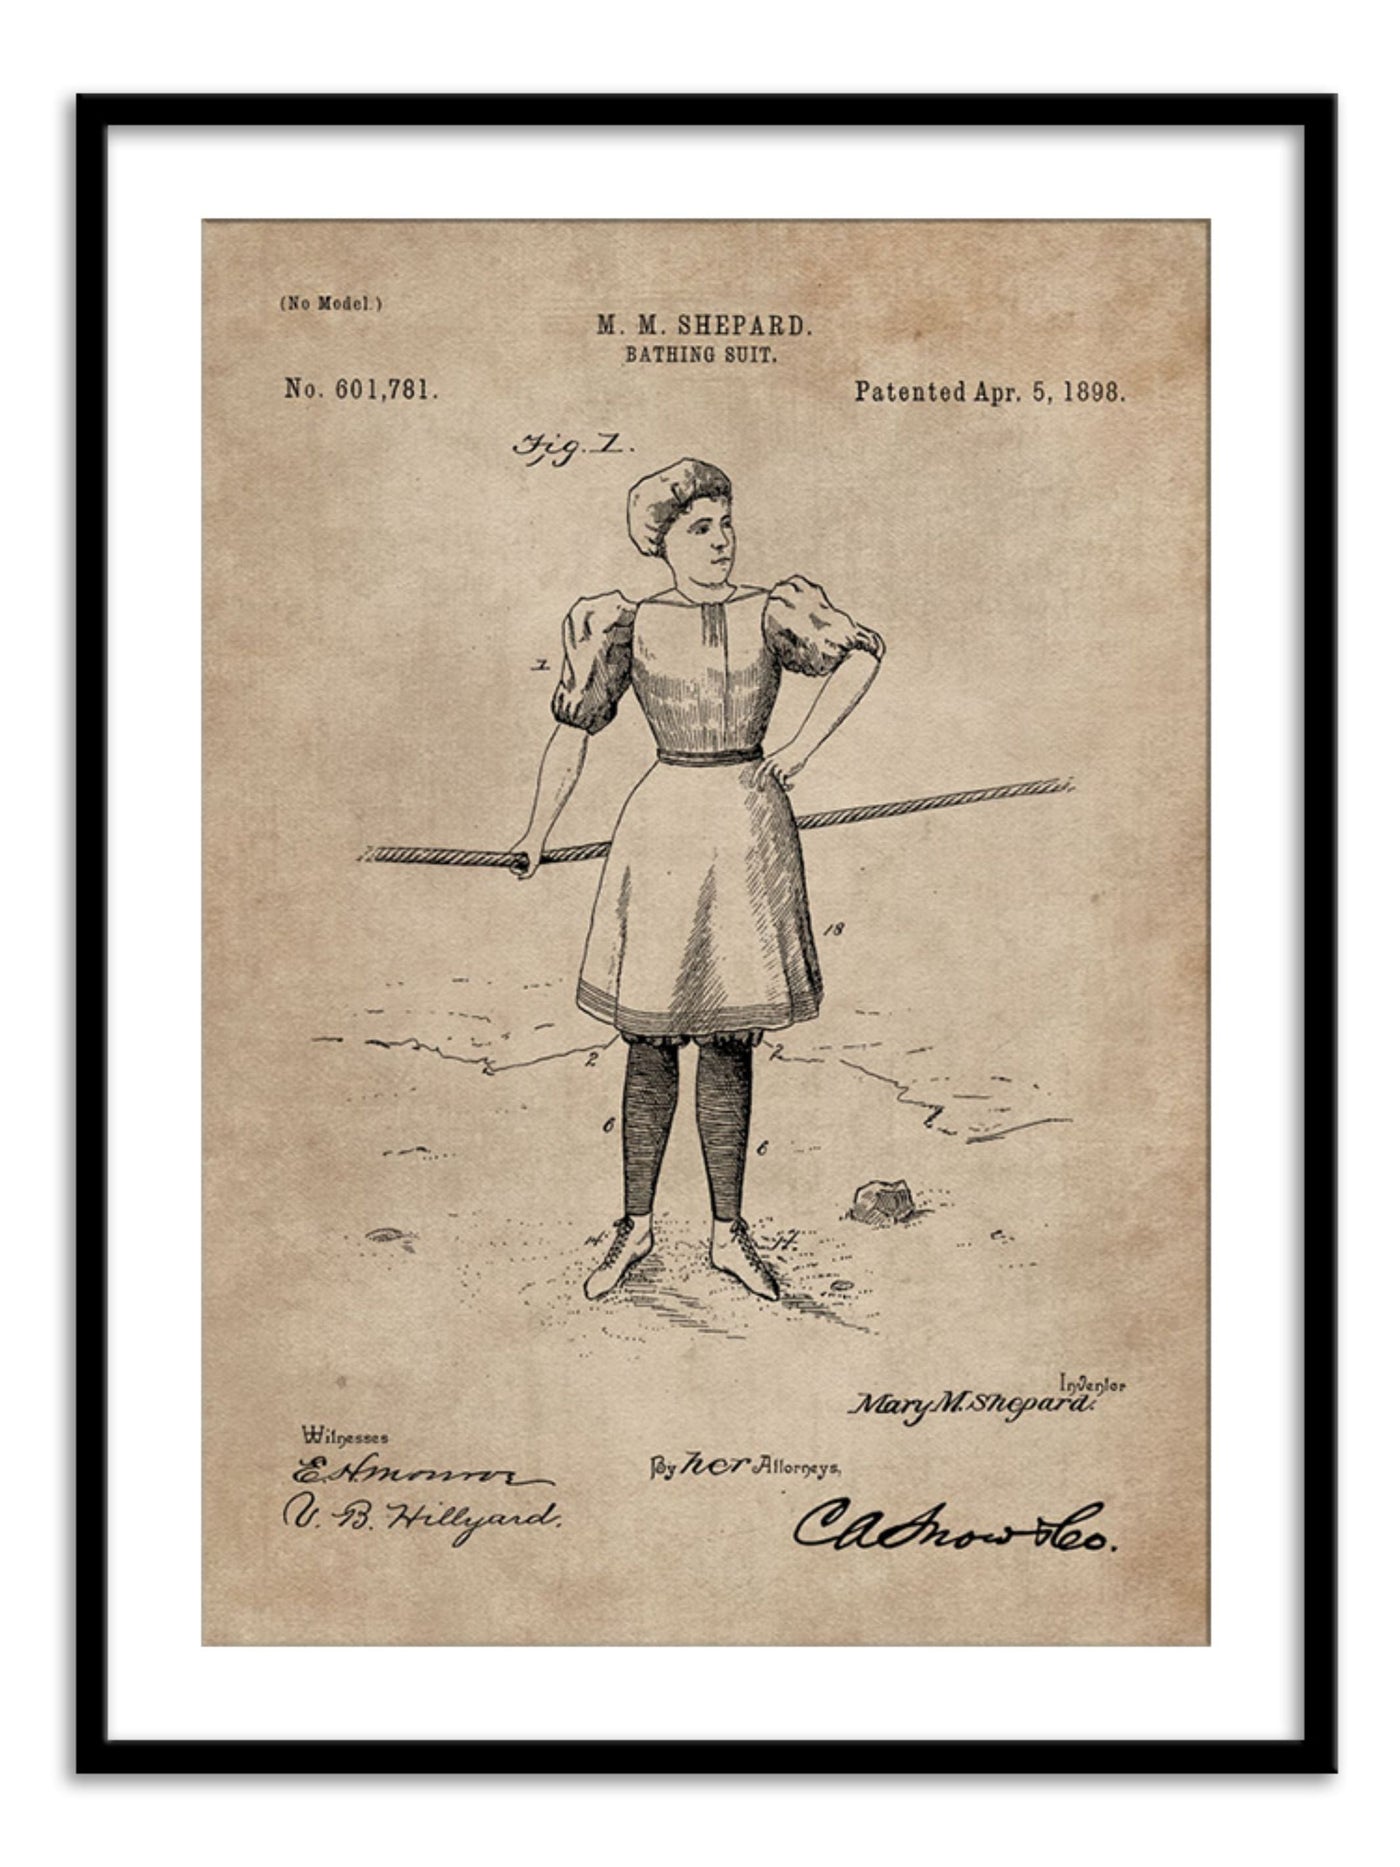 Patent Document of a Bathing Suit Wall Prints